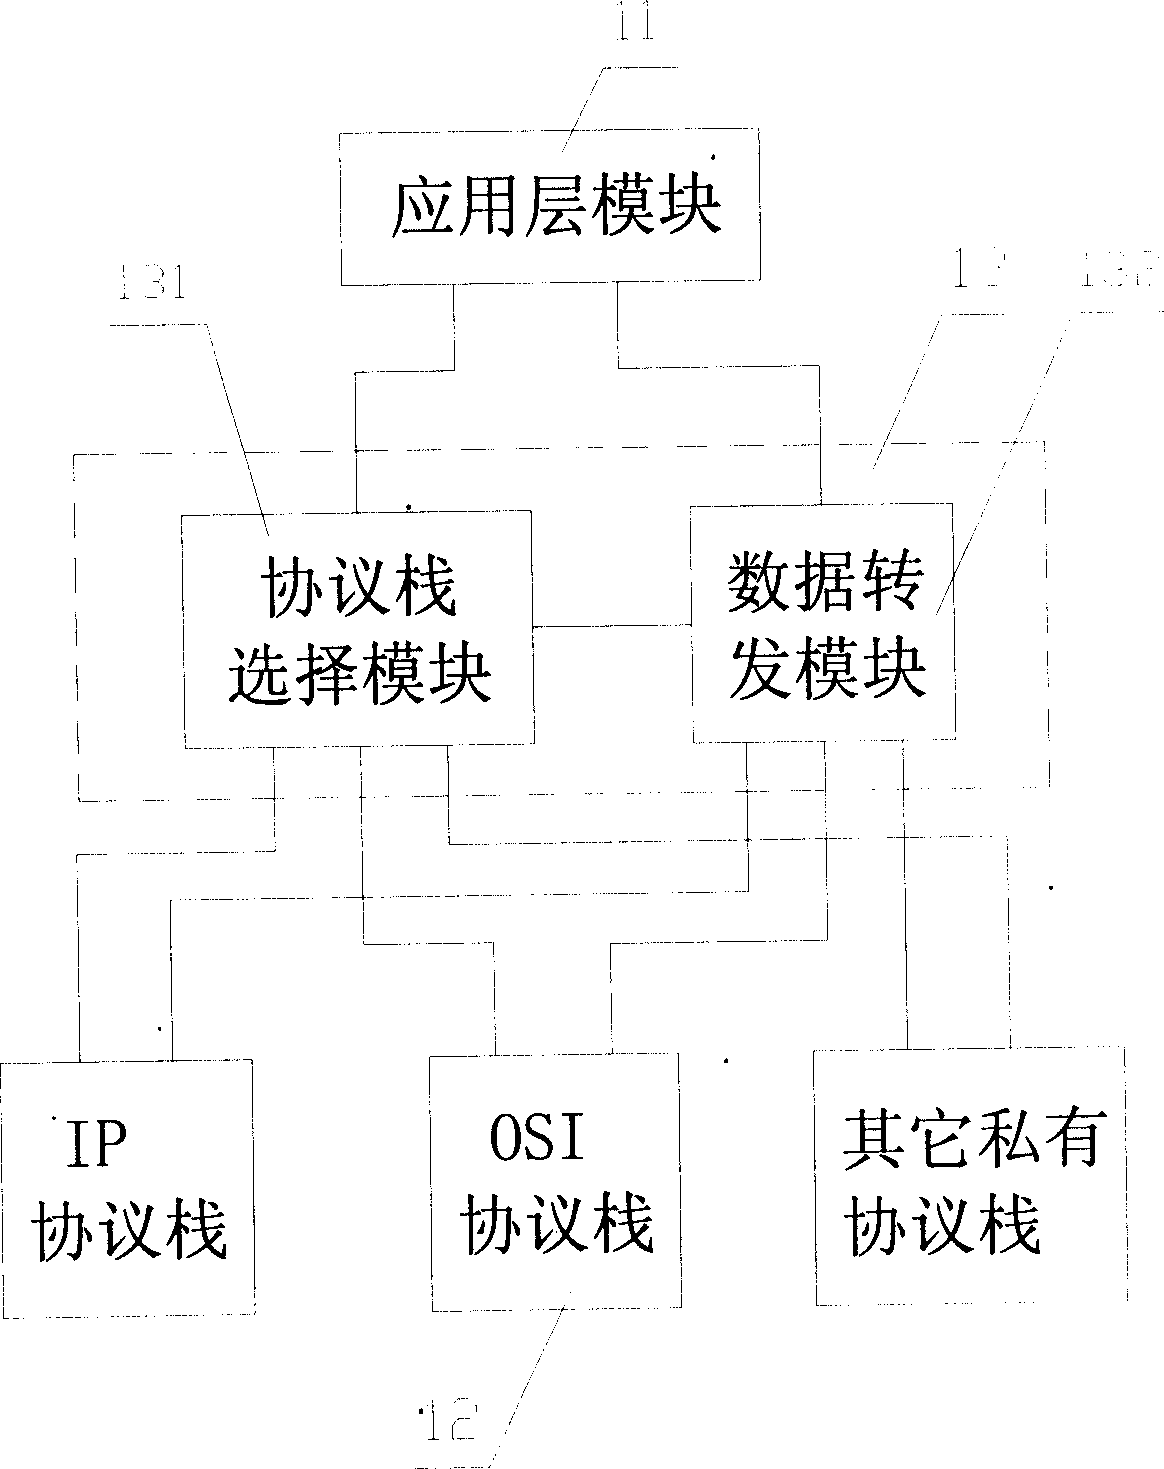 Method and system for multi-protocol network interconnection and intercommunication